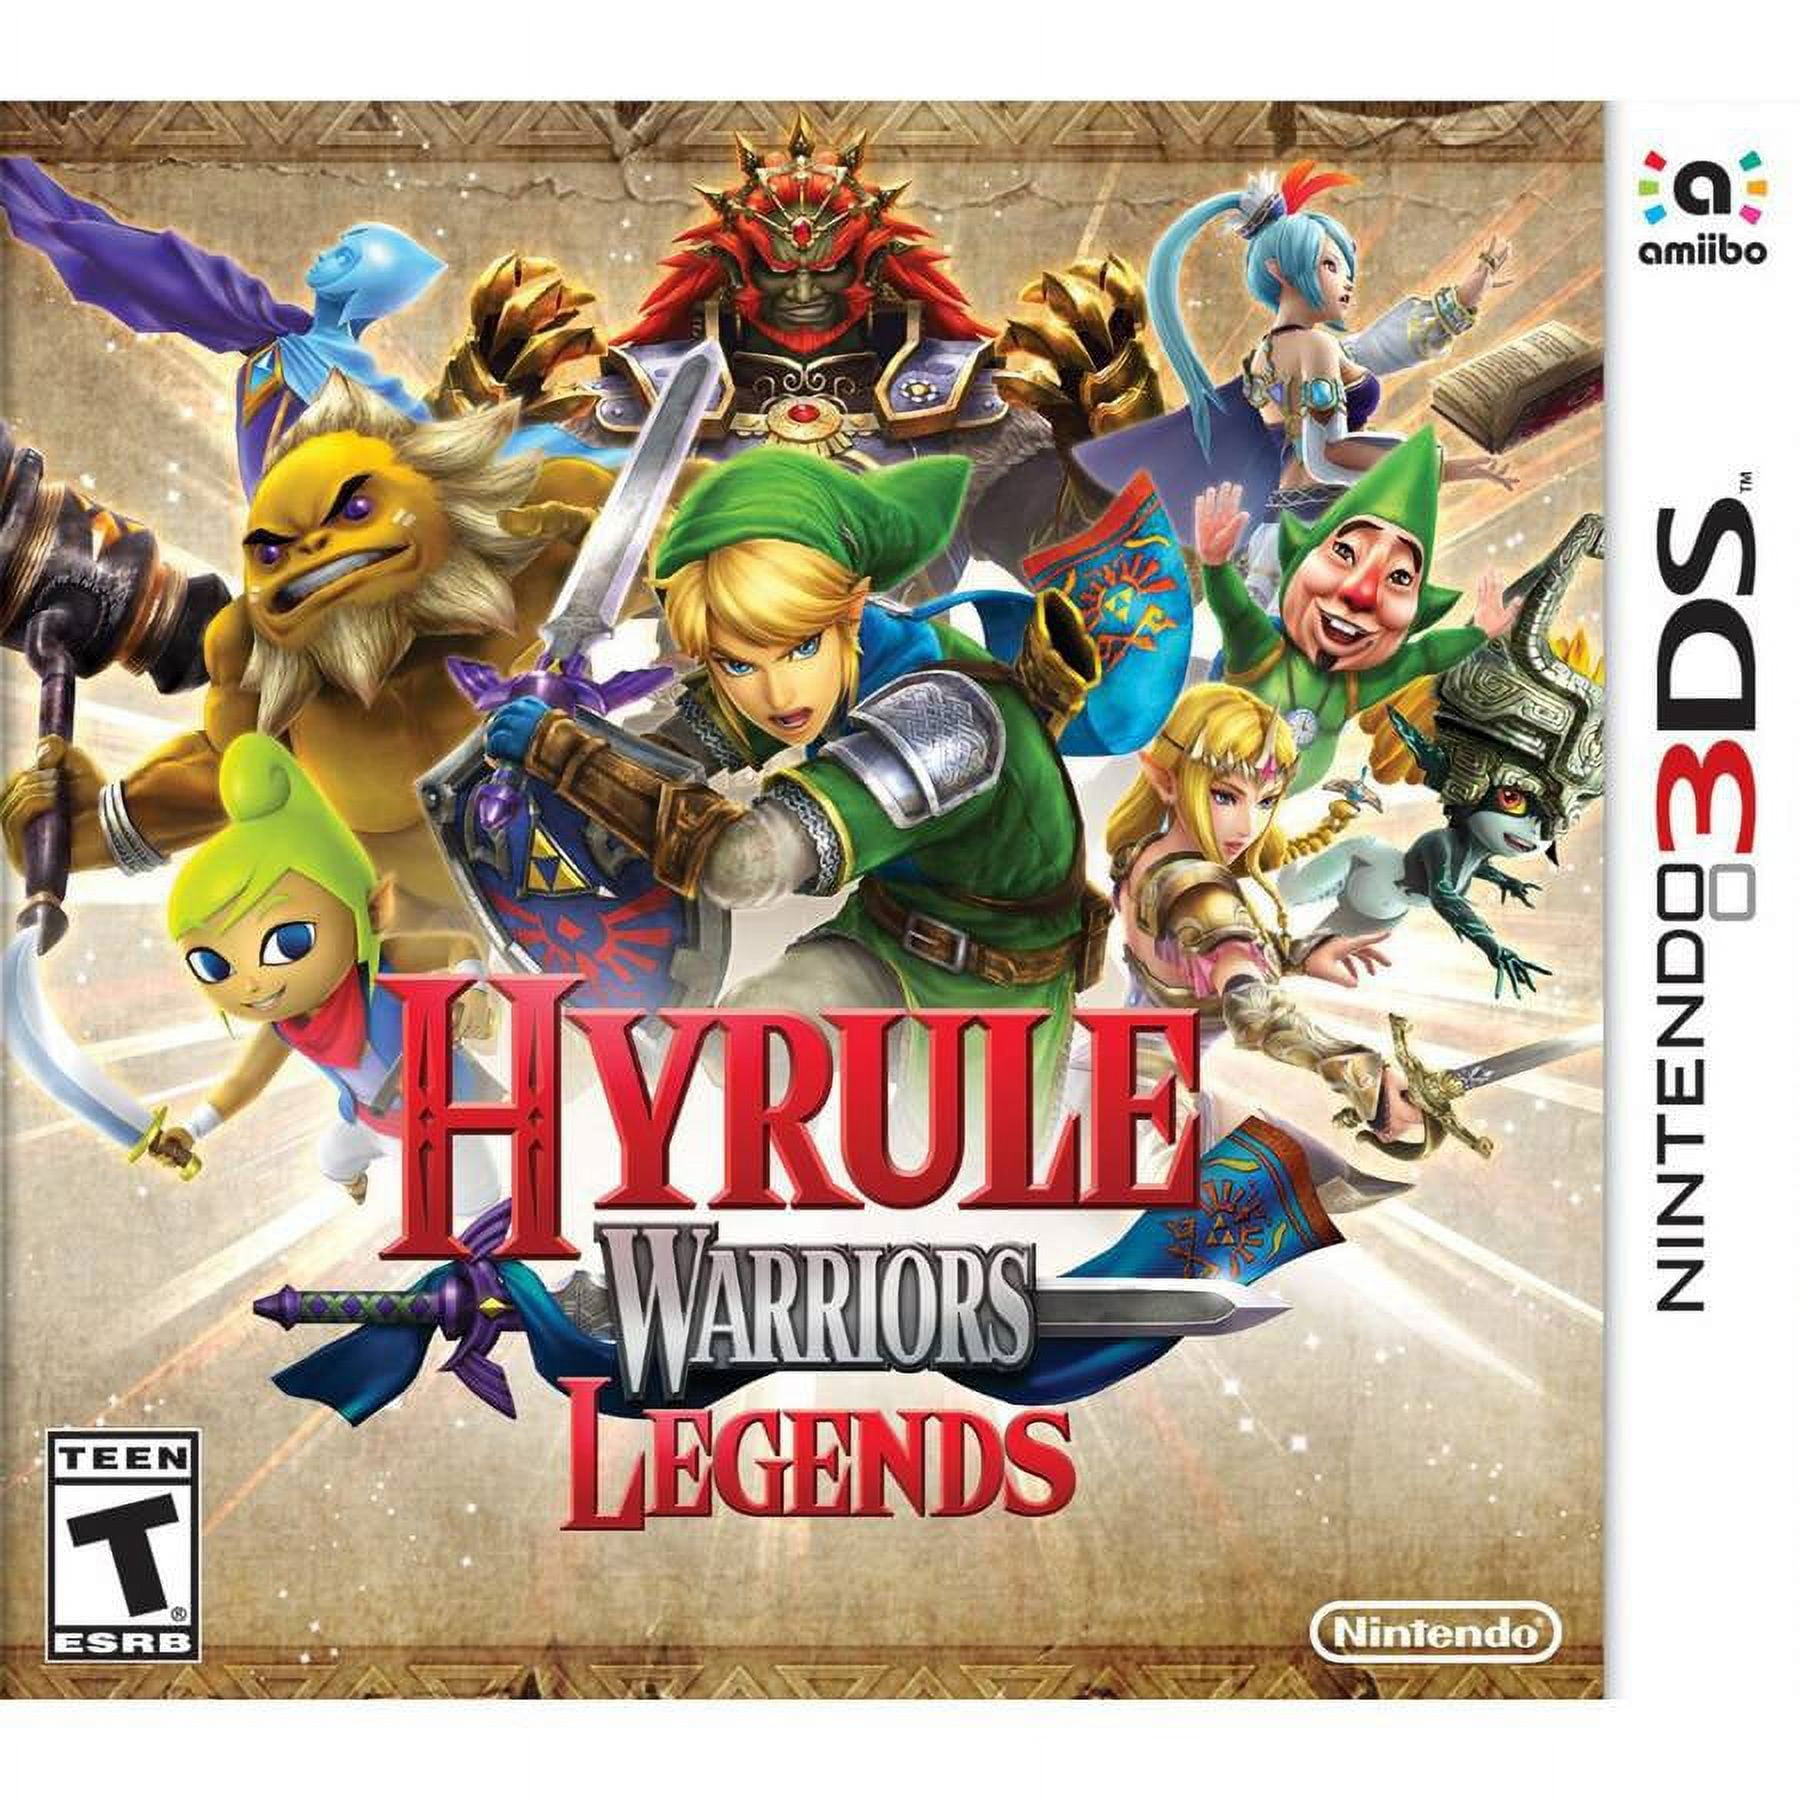 New - 3DS LEGEND OF ZELDA:OCARINA OF TIME - CTRPAQEE [ 3DS], New - Retail  By Nintendo From USA